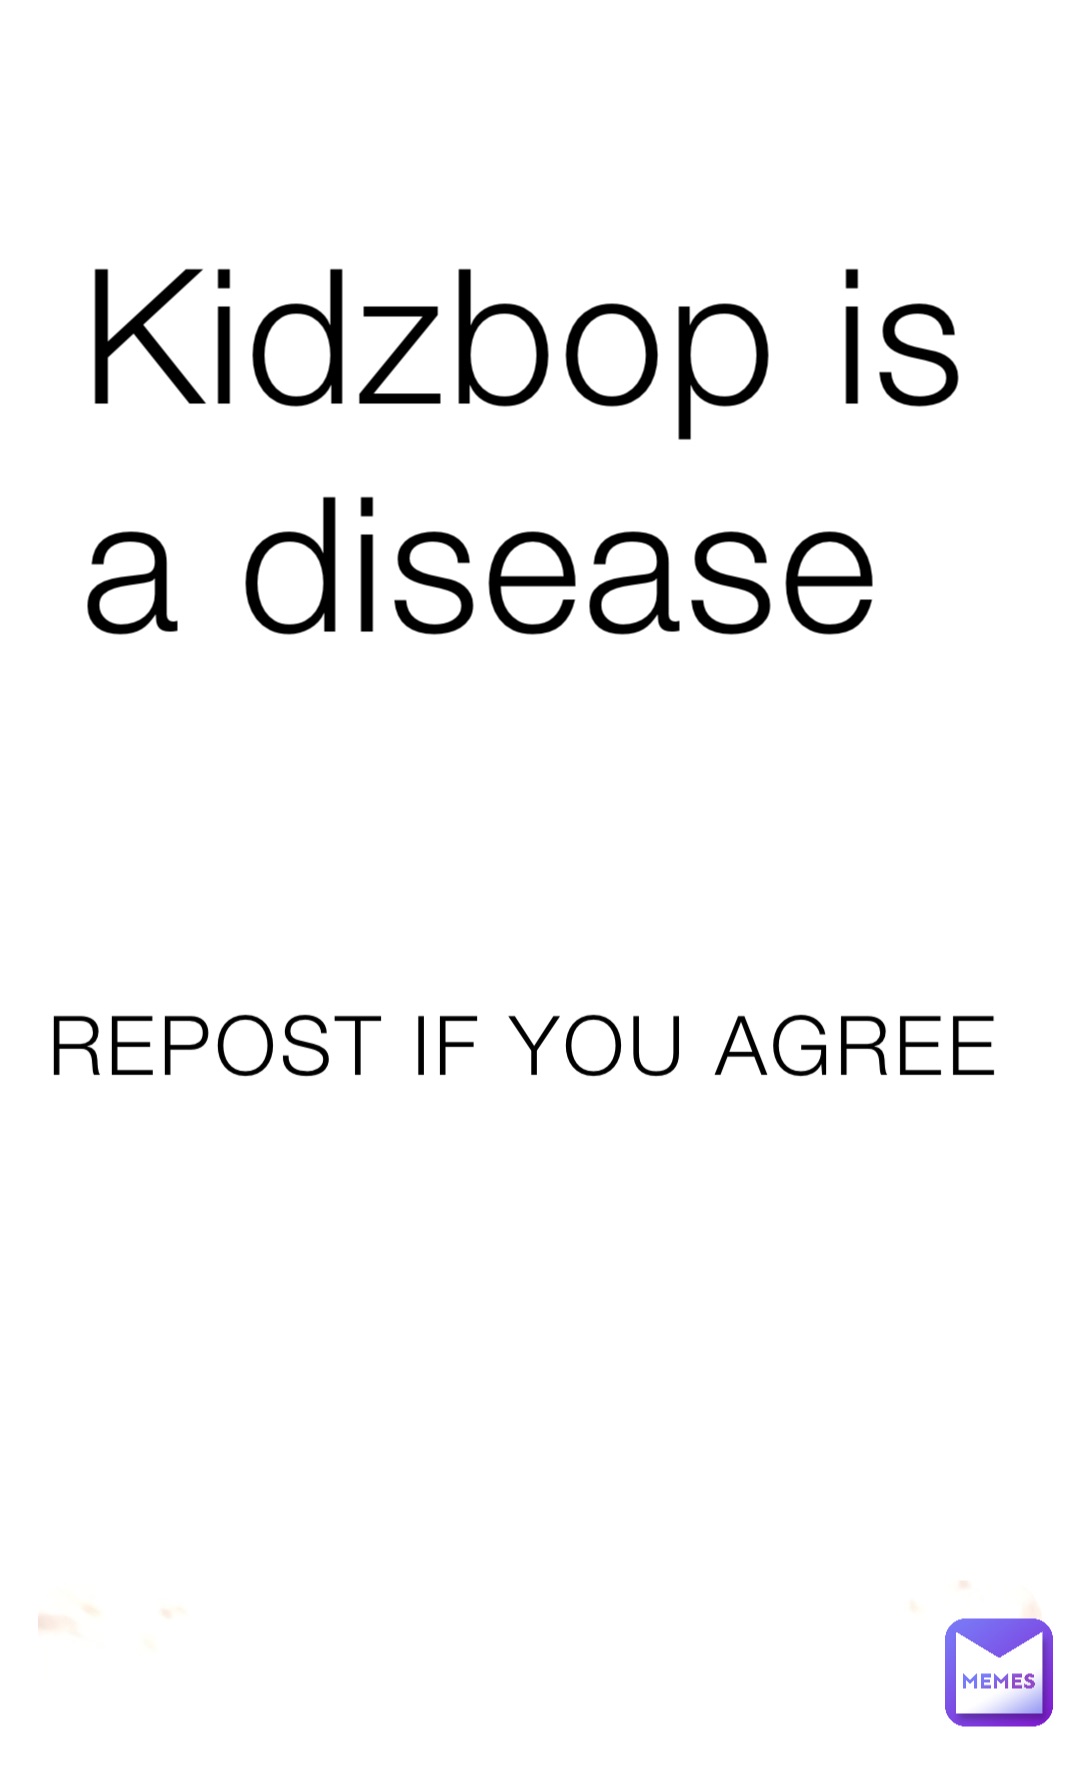 Kidzbop is a disease REPOST IF YOU AGREE